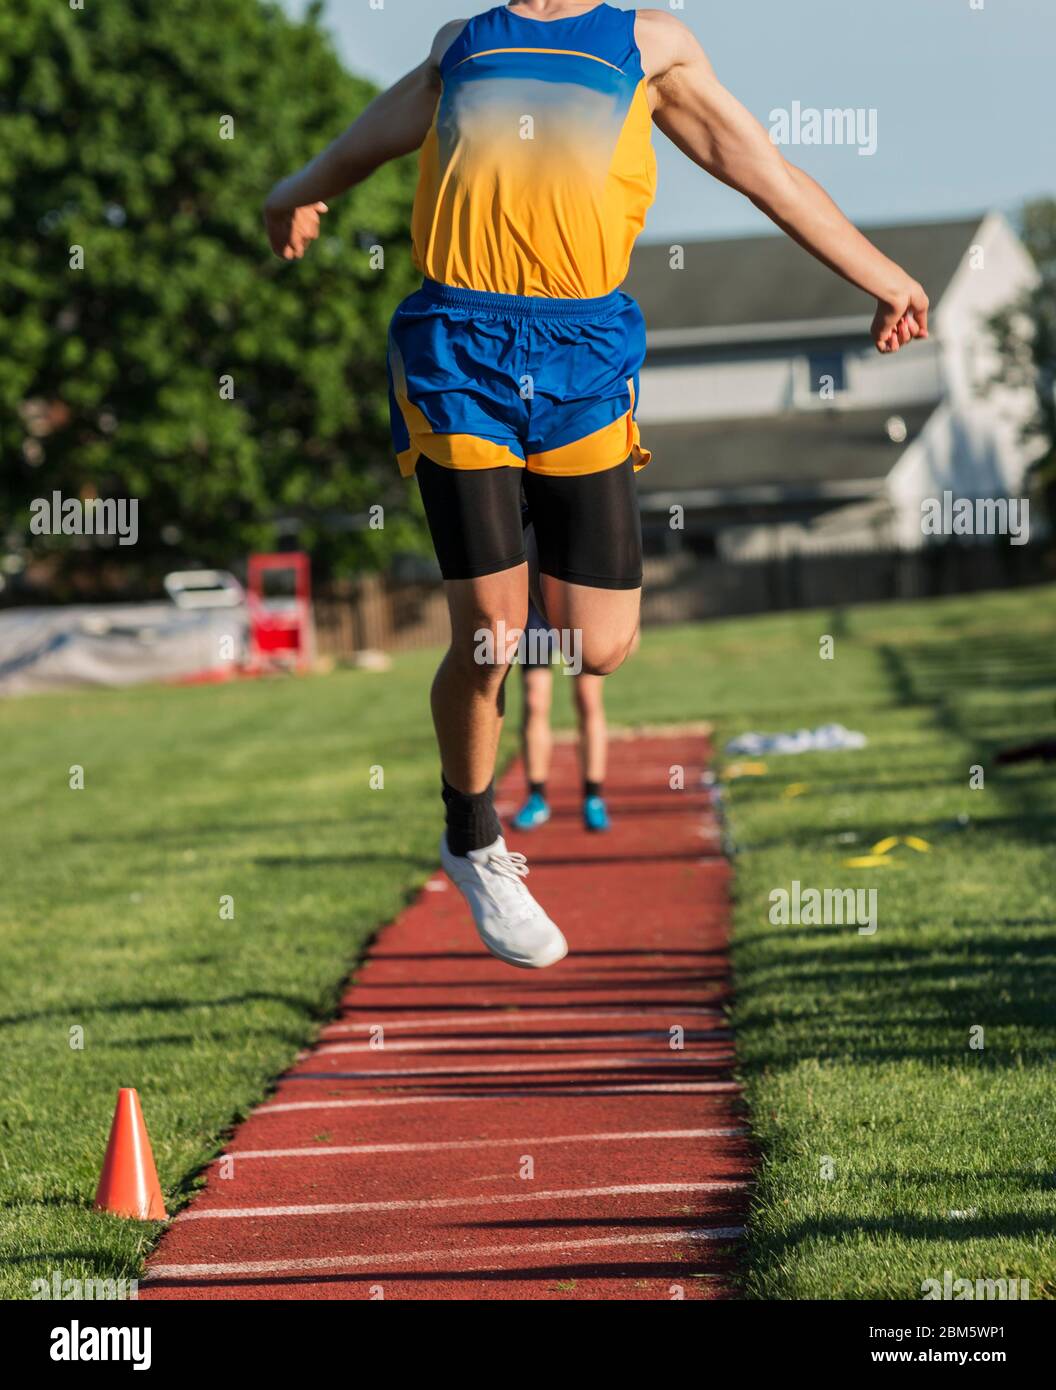 A teenage boy is flying in the air getting ready to land in the sand pit during a triple jump competition at a track and field event. Stock Photo